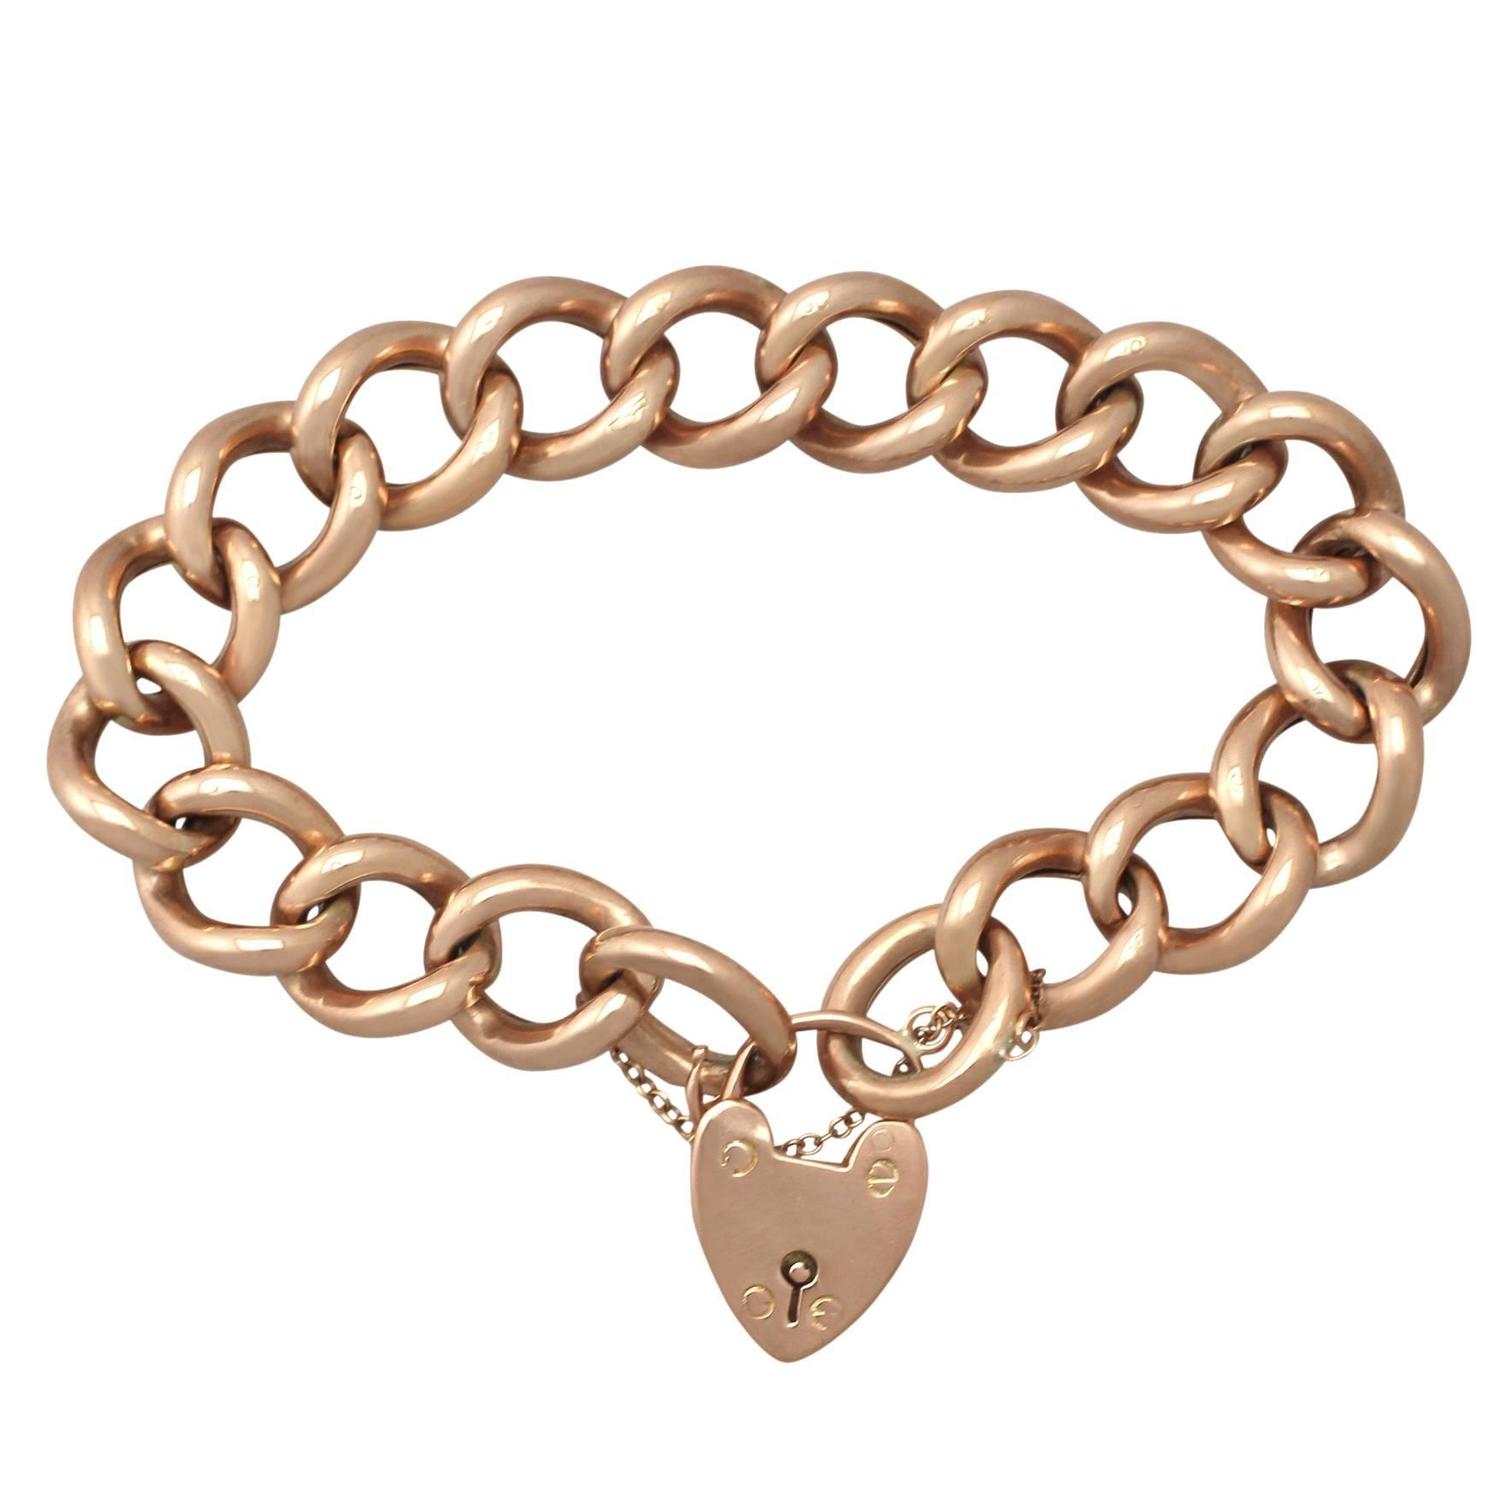 9k Rose Gold Bracelet with Heart Padlock Clasp - Antique Circa 1915 For Sale at 1stdibs